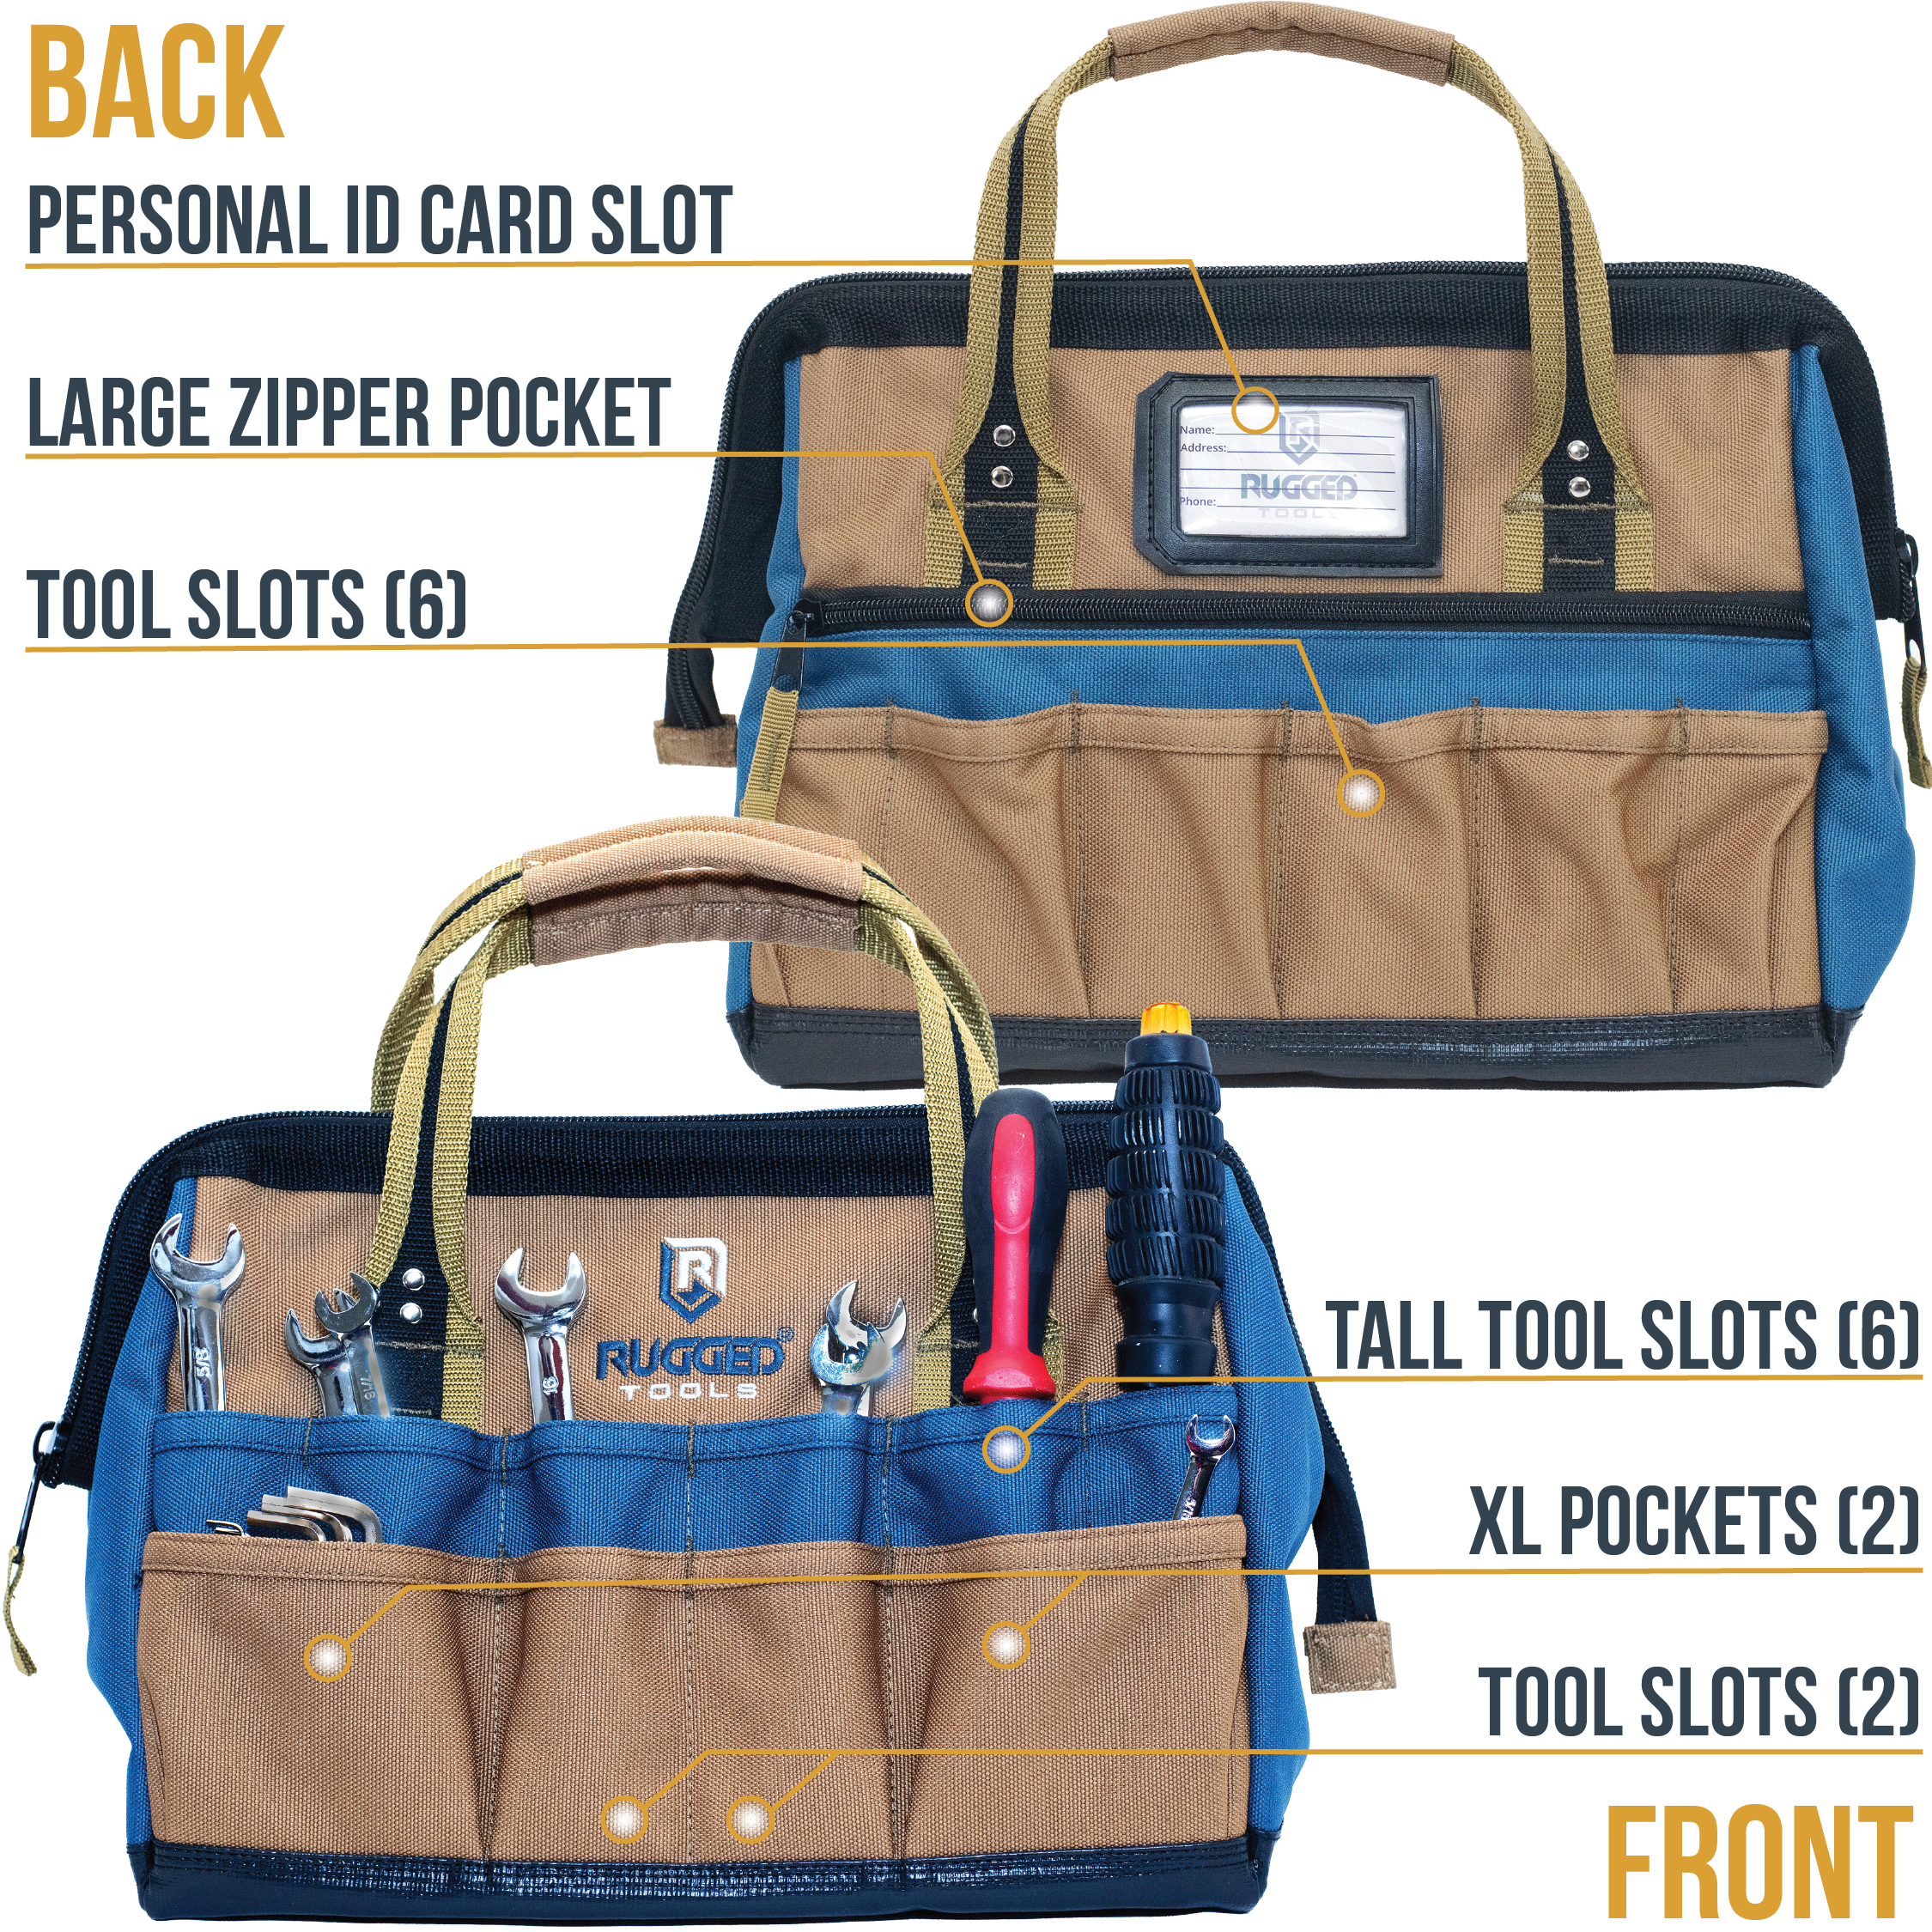 Rugged Tools Wide-Mouth Tool Bag Listing3.png